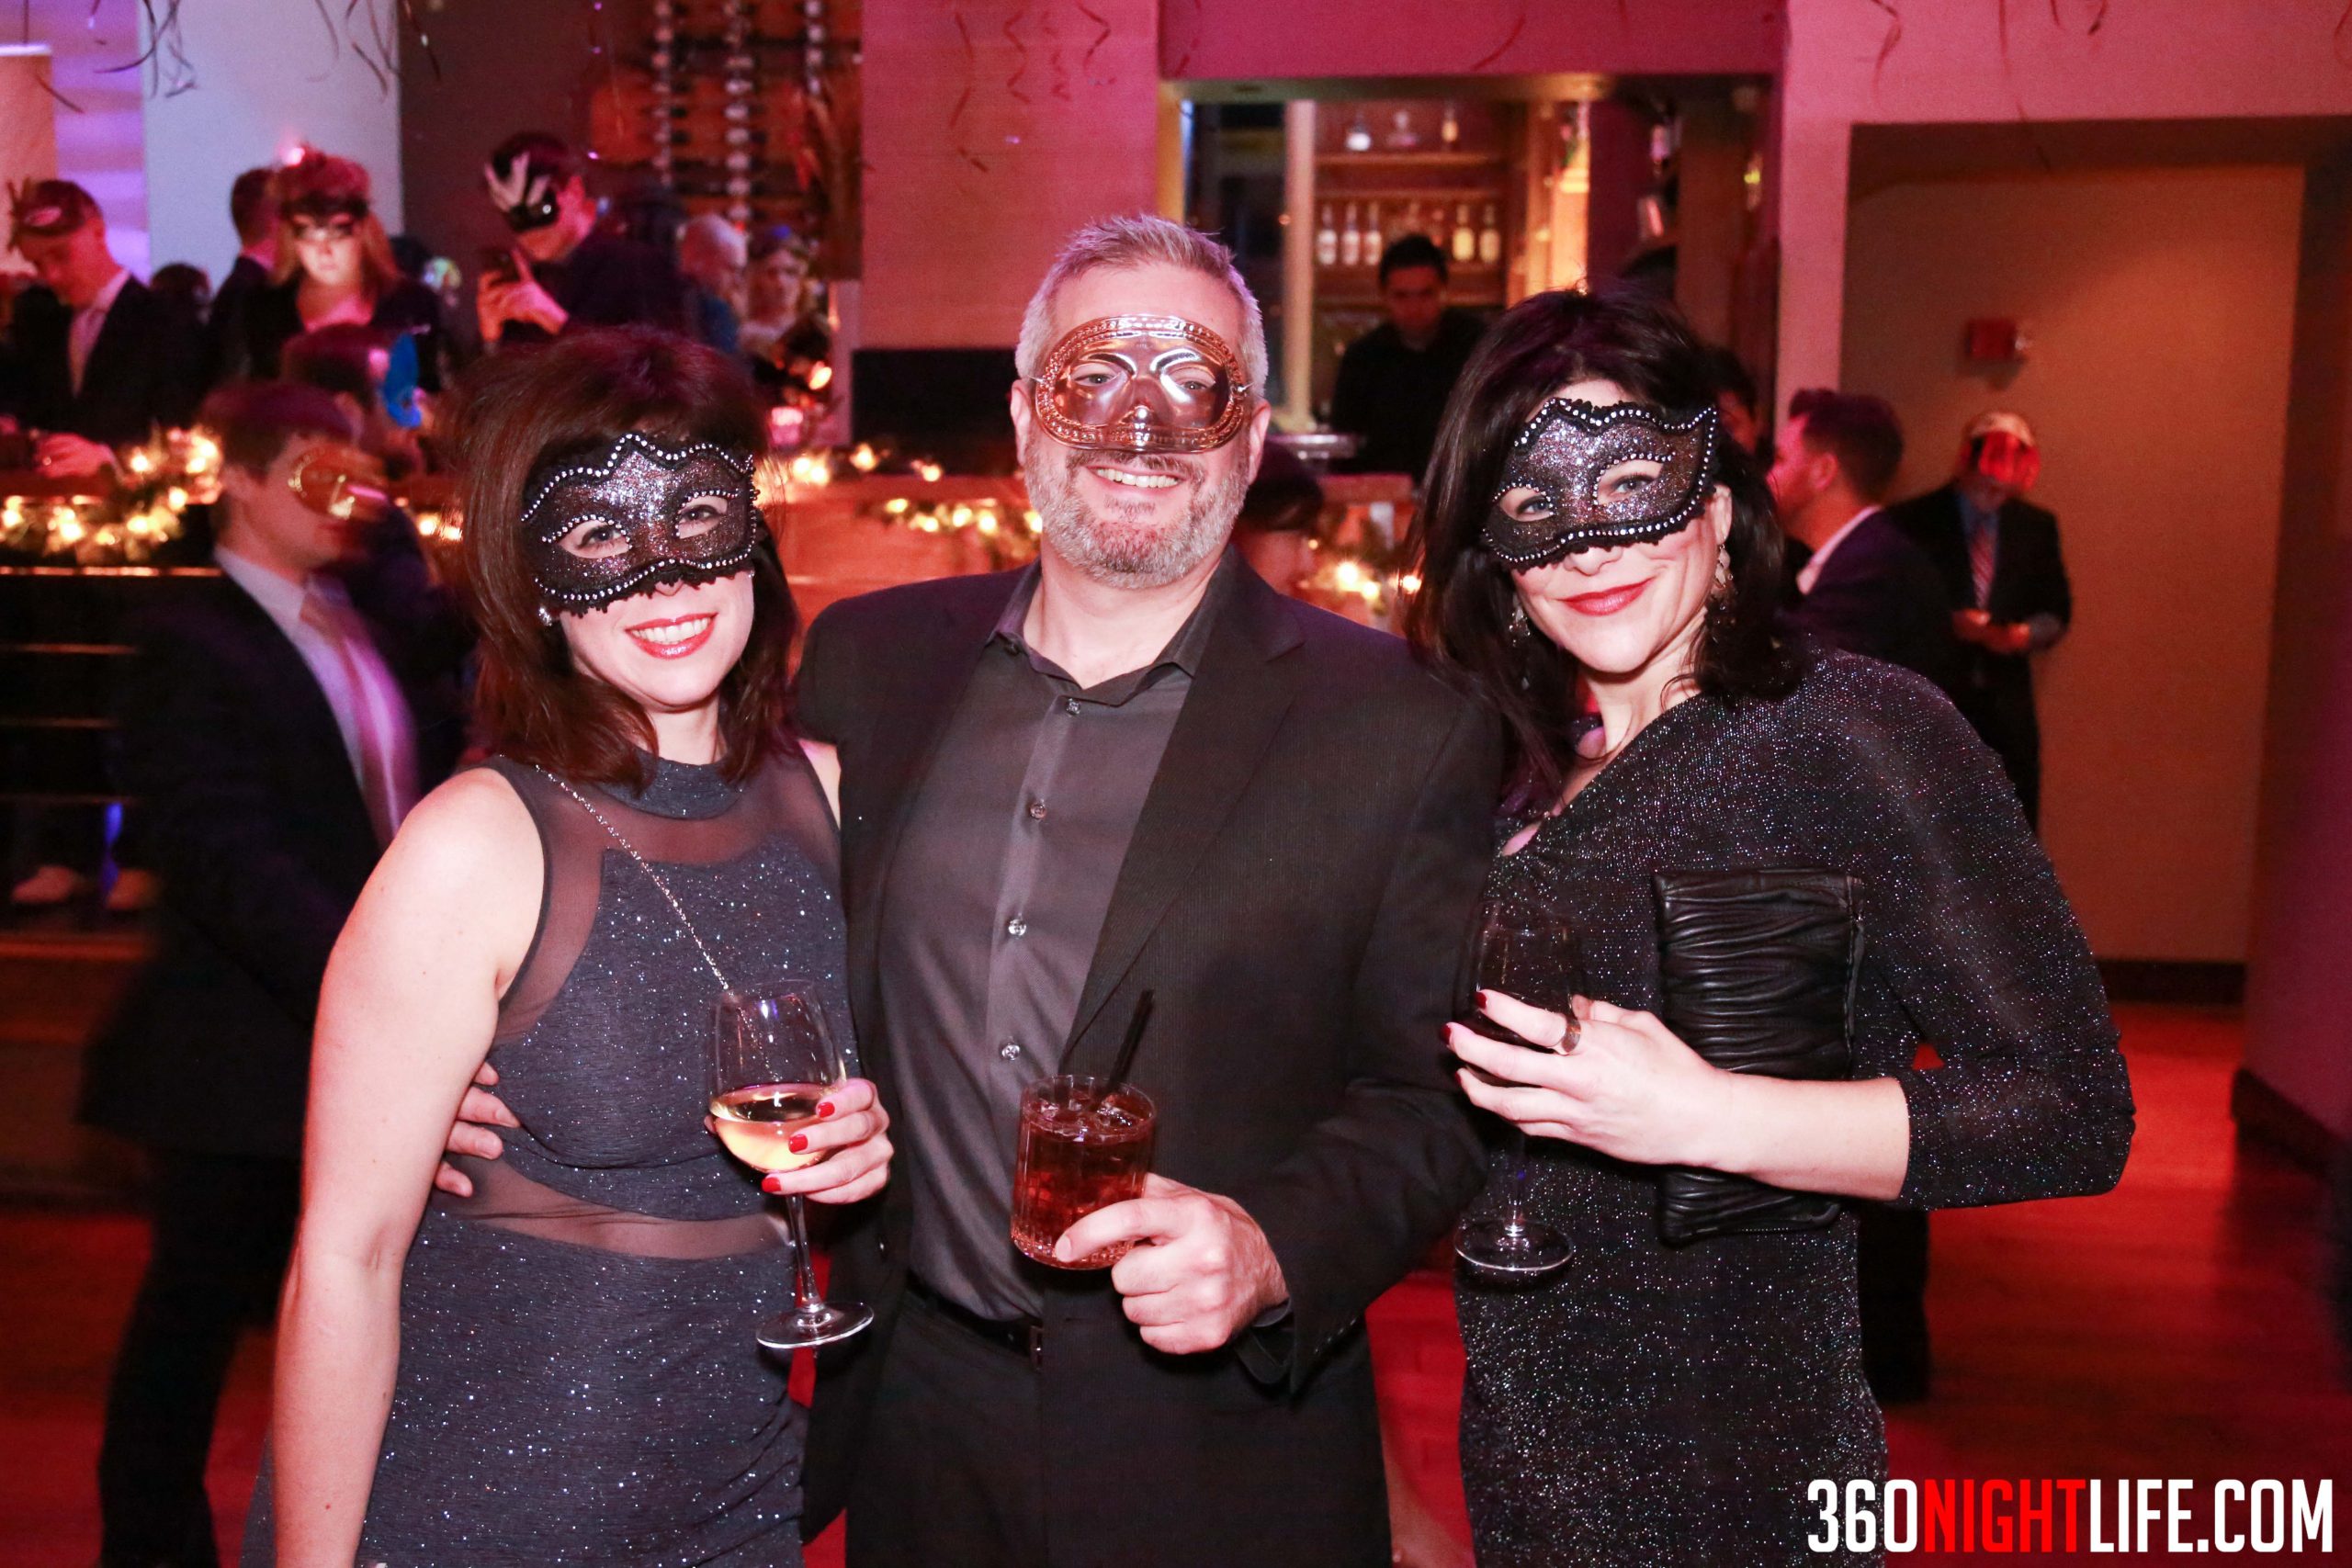 2 women with black masquerade masks on with a man with a grey beard in the middle, he also has a masquerade mask but it is purple or so. They are at the National New Years Eve Masquerade Gala in Washington DC. A very famous and well attended event by 360 Nightlife.